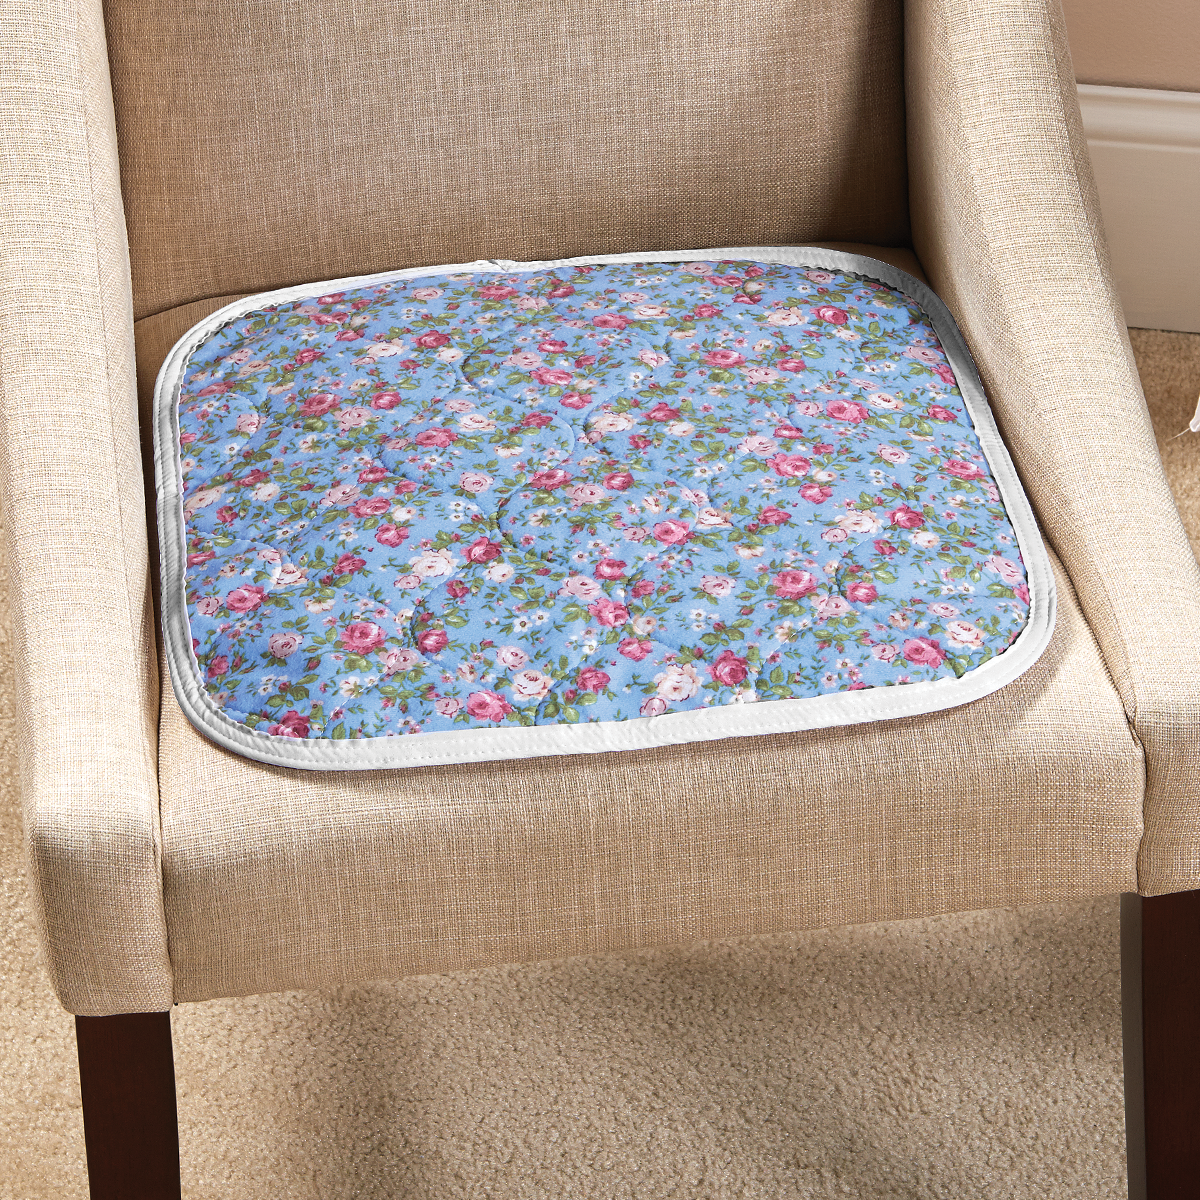 CareFor™ Deluxe Incontinence Chair Pads